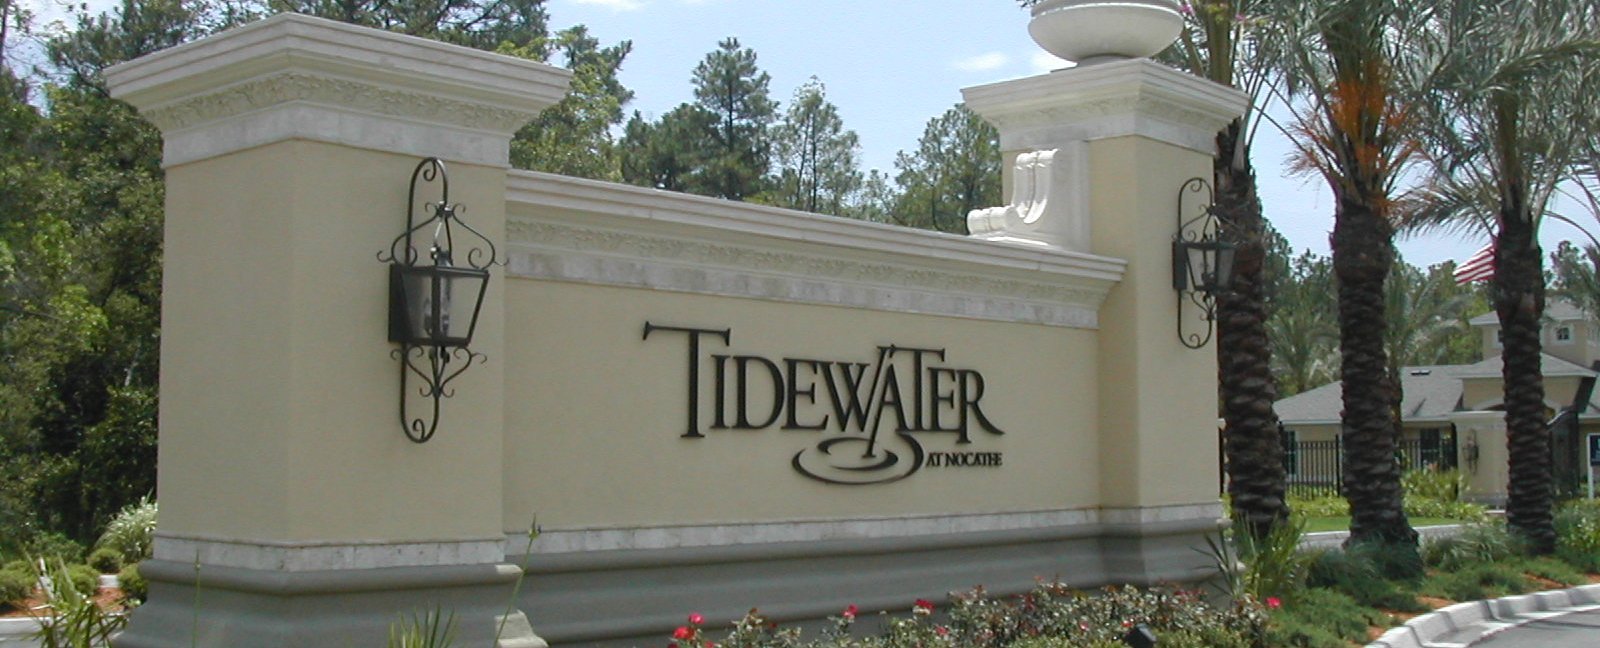 Tidewater at Nocatee Townhomes